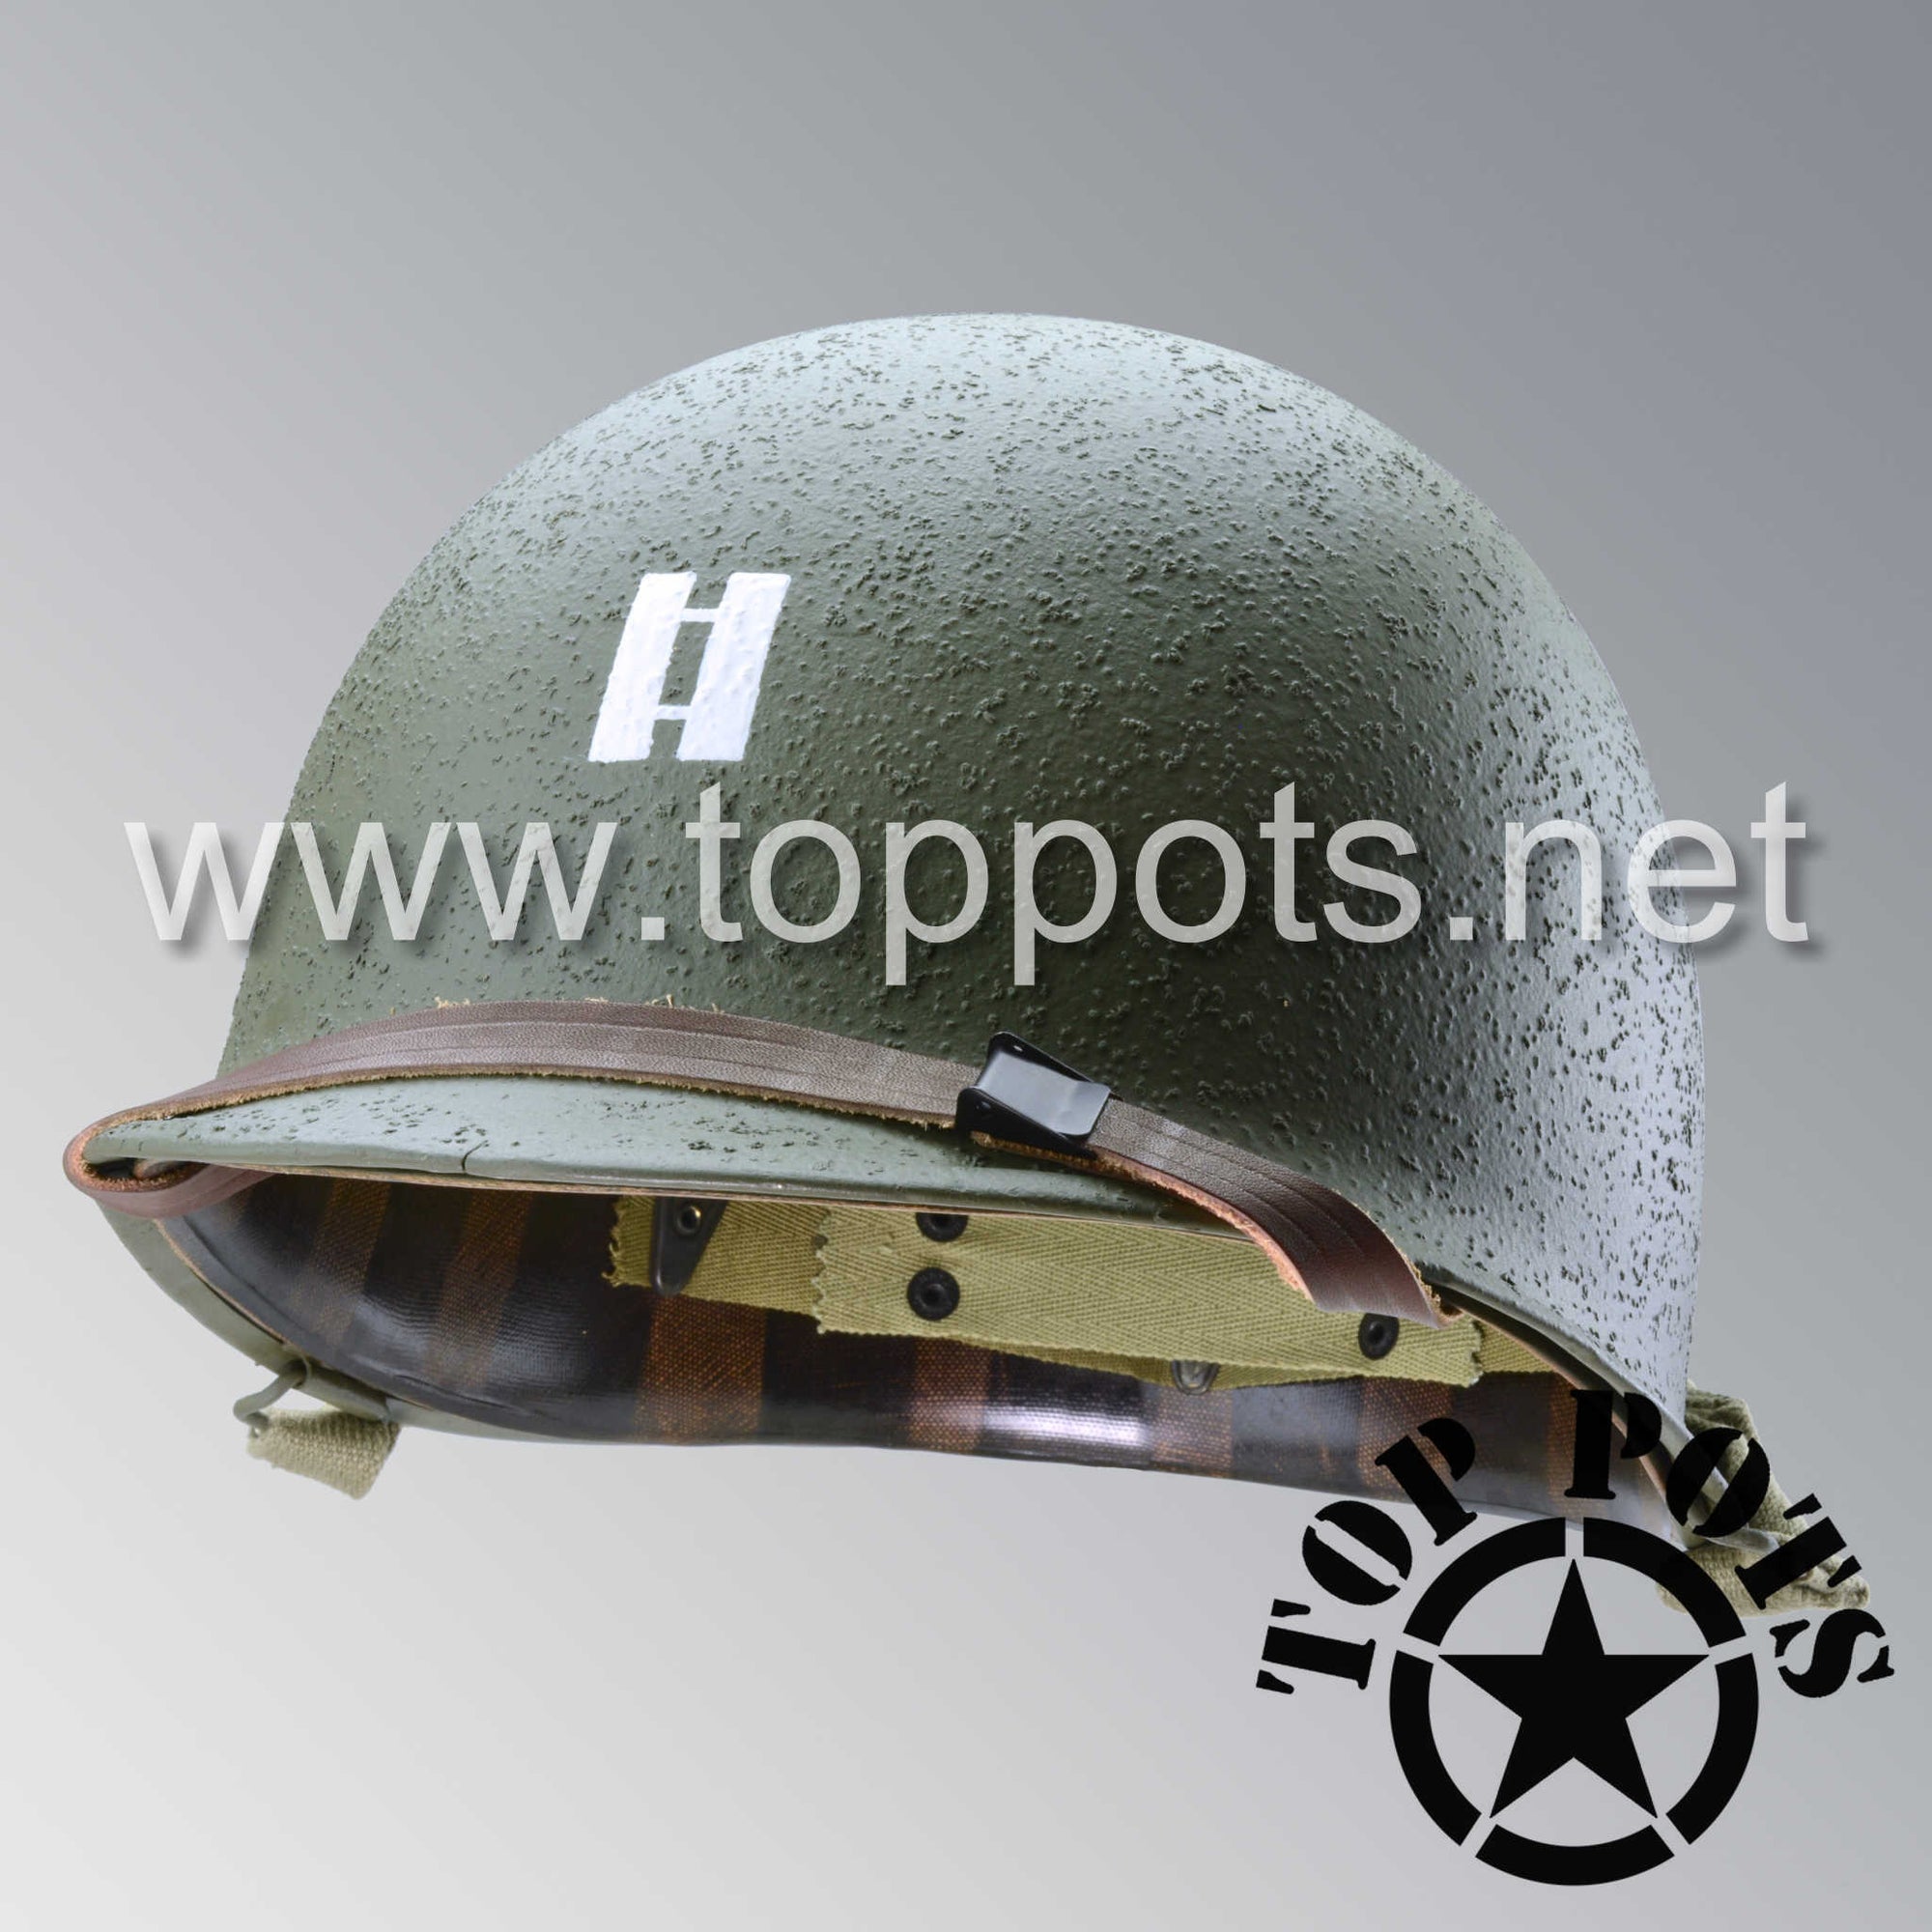 WWII US Army Restored Original M1 Infantry Helmet Swivel Bale Shell and Liner with 2nd Ranger Captain Miller Rank and Leadership Stripe - Tom Hanks Saving Private Ryan